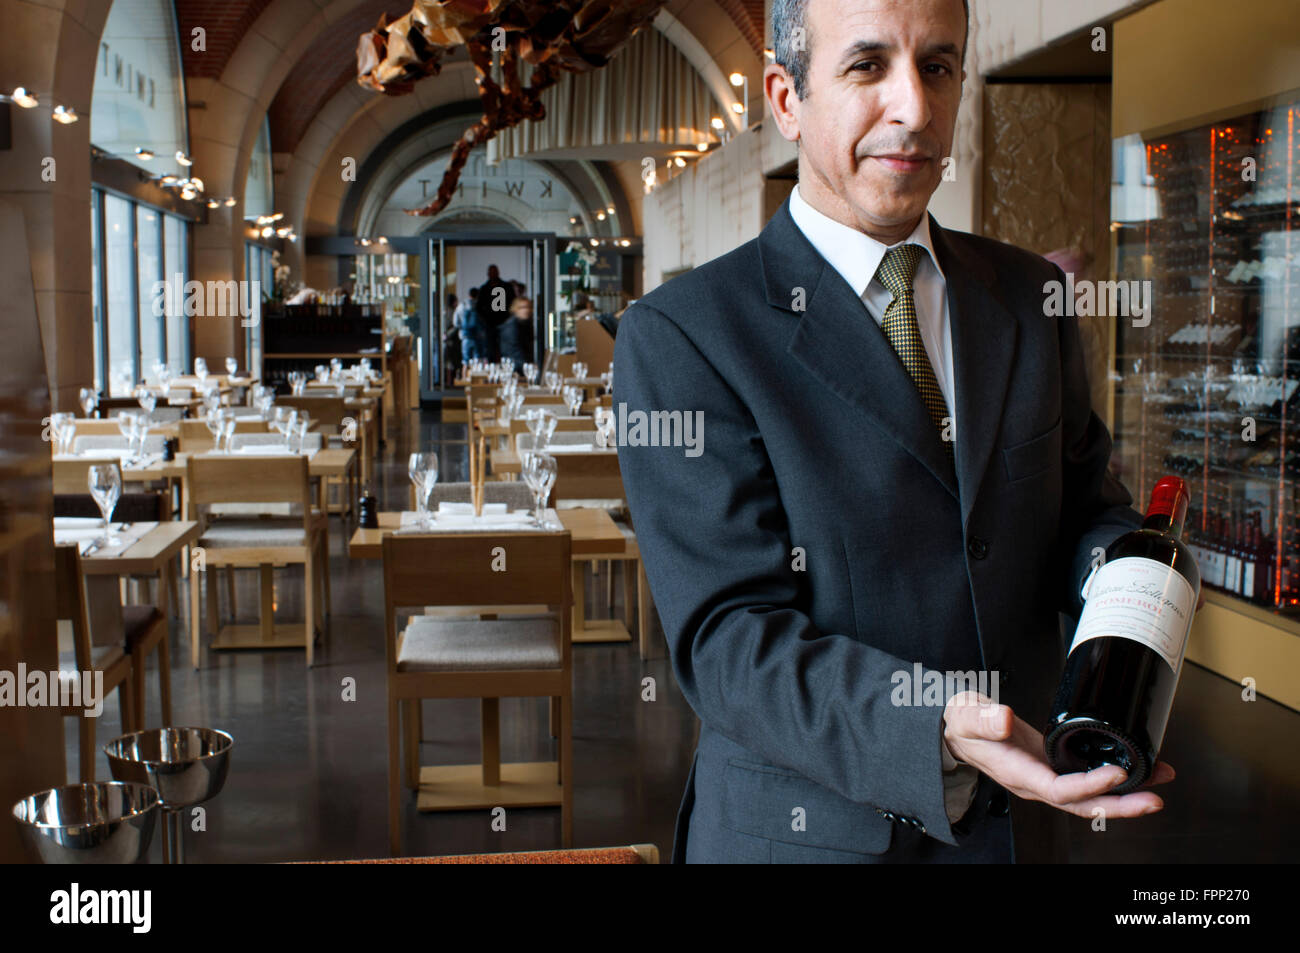 Sommelier of Kwint restaurant, Brussels, Belgium. Kwint is an upscale restaurant with modern twist, thanks to its unconventional Stock Photo